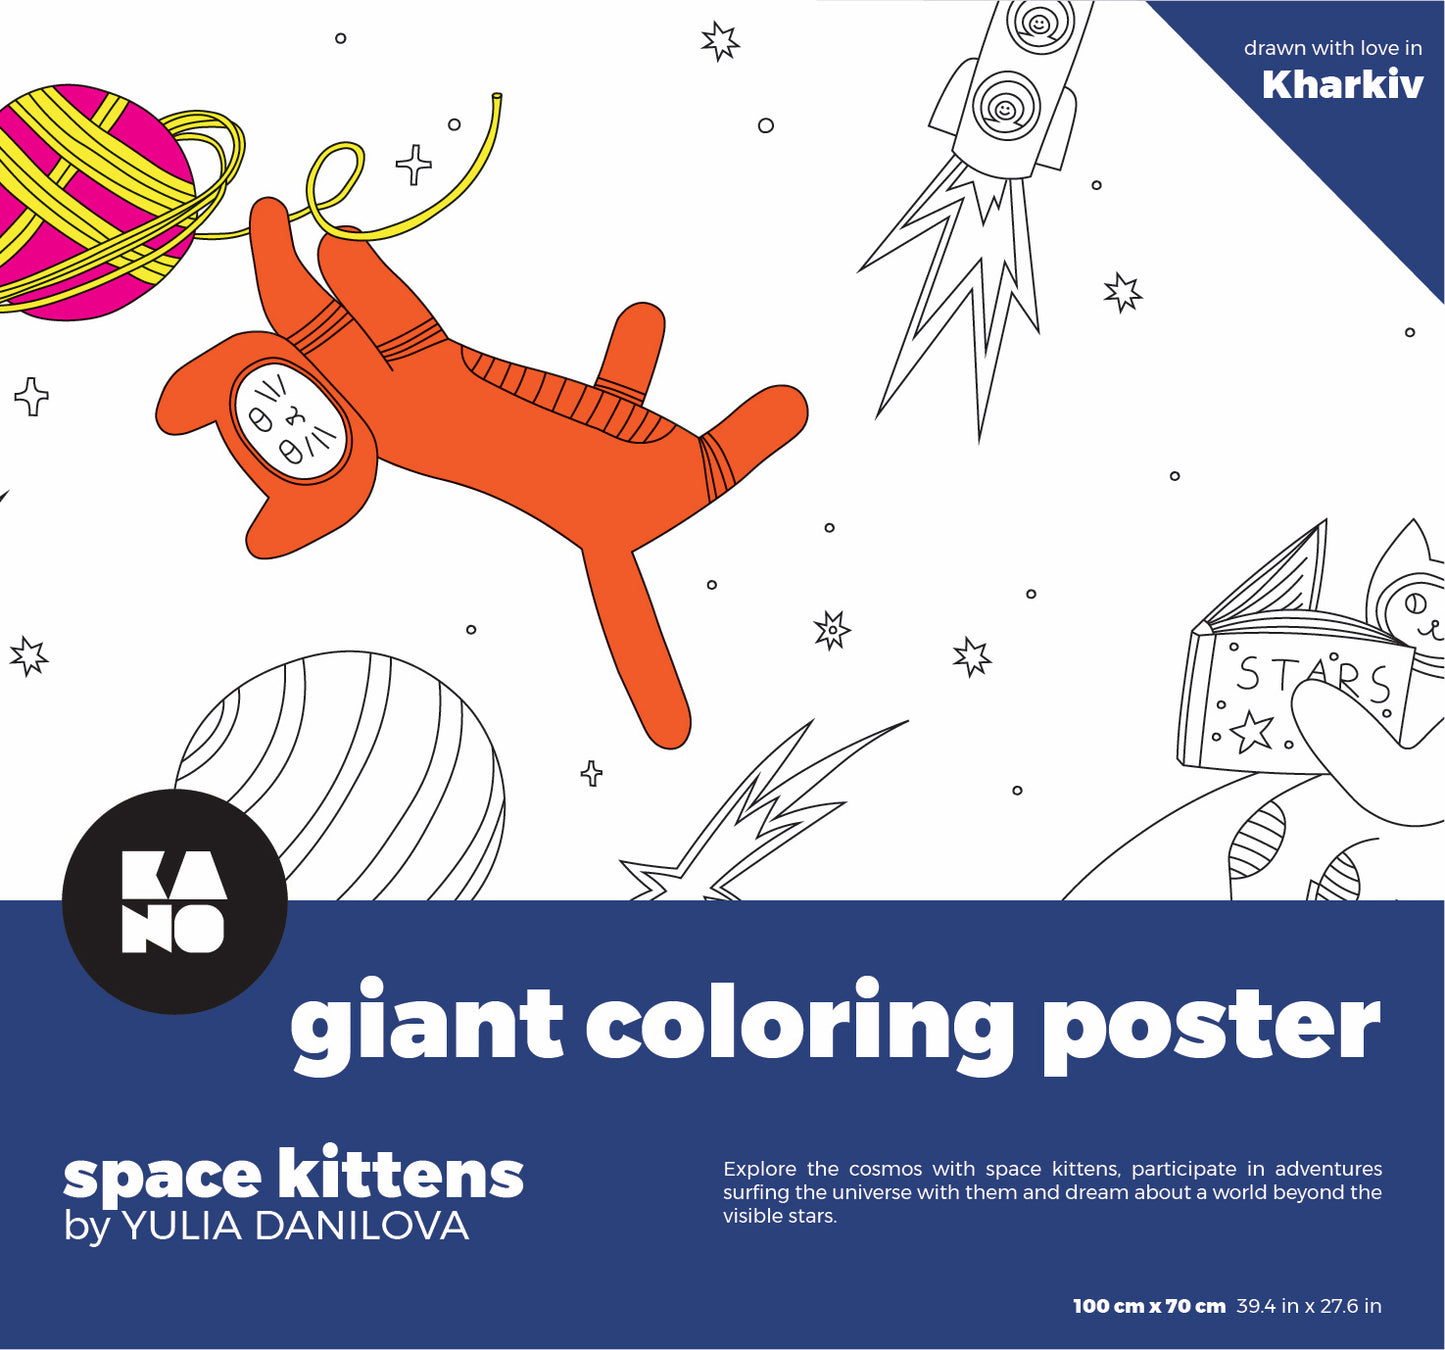 XXL Space kittens coloring poster, ISBN 9789934899348, sustainable, plastic free, responsible, view from box front 